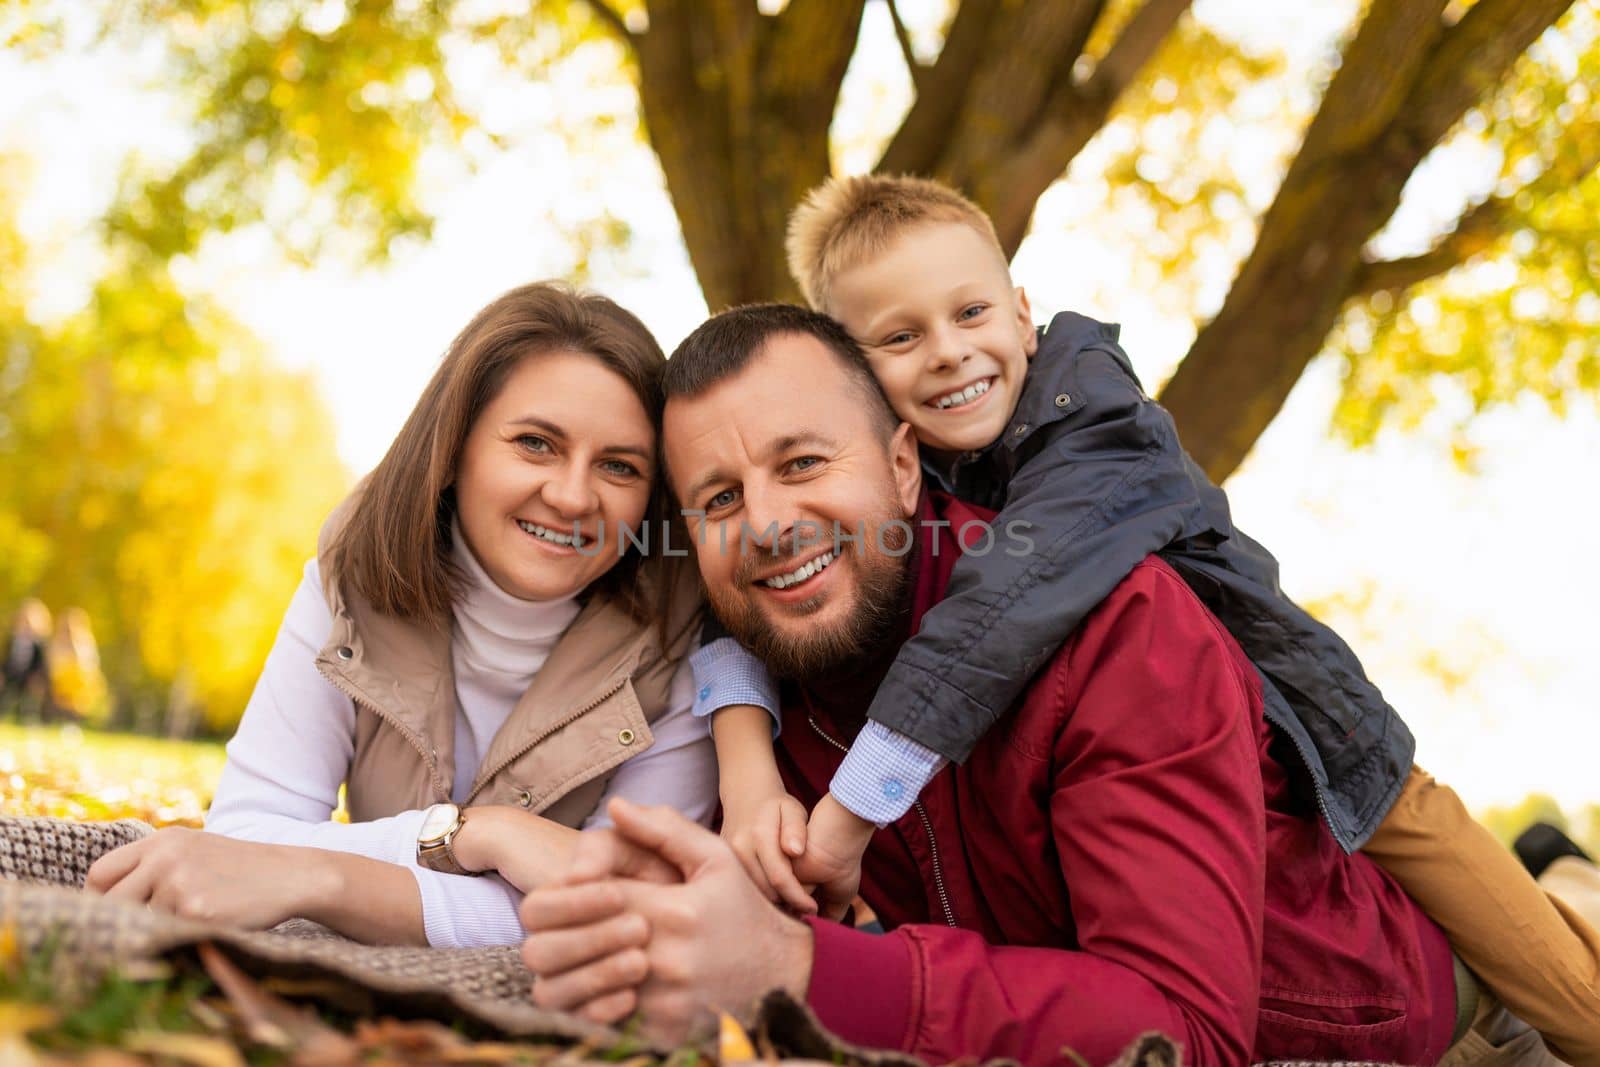 close-up portrait of a happy traditional family with a small child in a park on the ground by TRMK